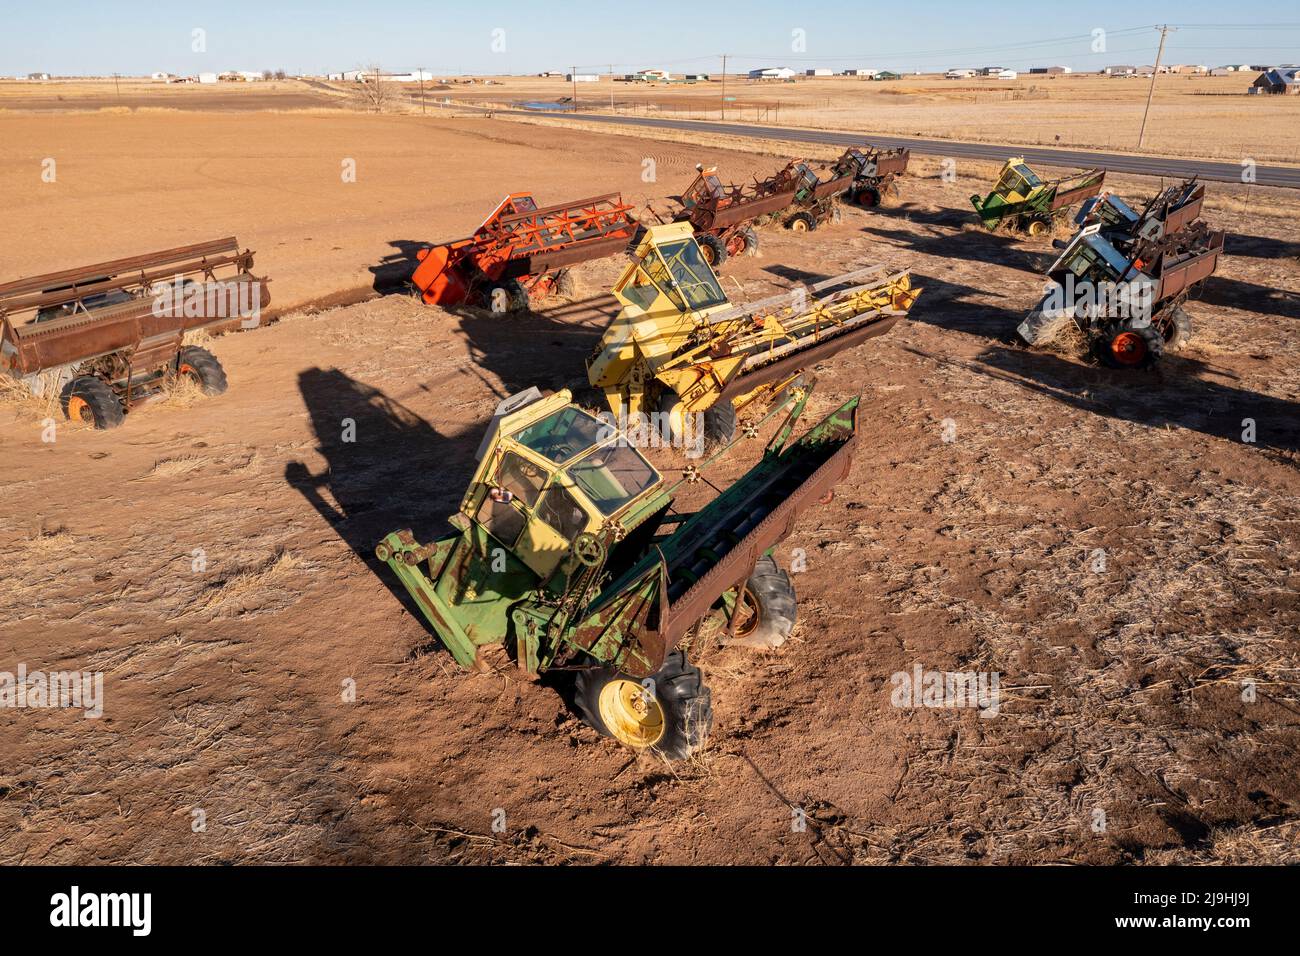 Canyon, Texas - Combine City, where a dozen old farm combines are partially buried in a field. Combine City is an imitation of the nearby better-known Stock Photo